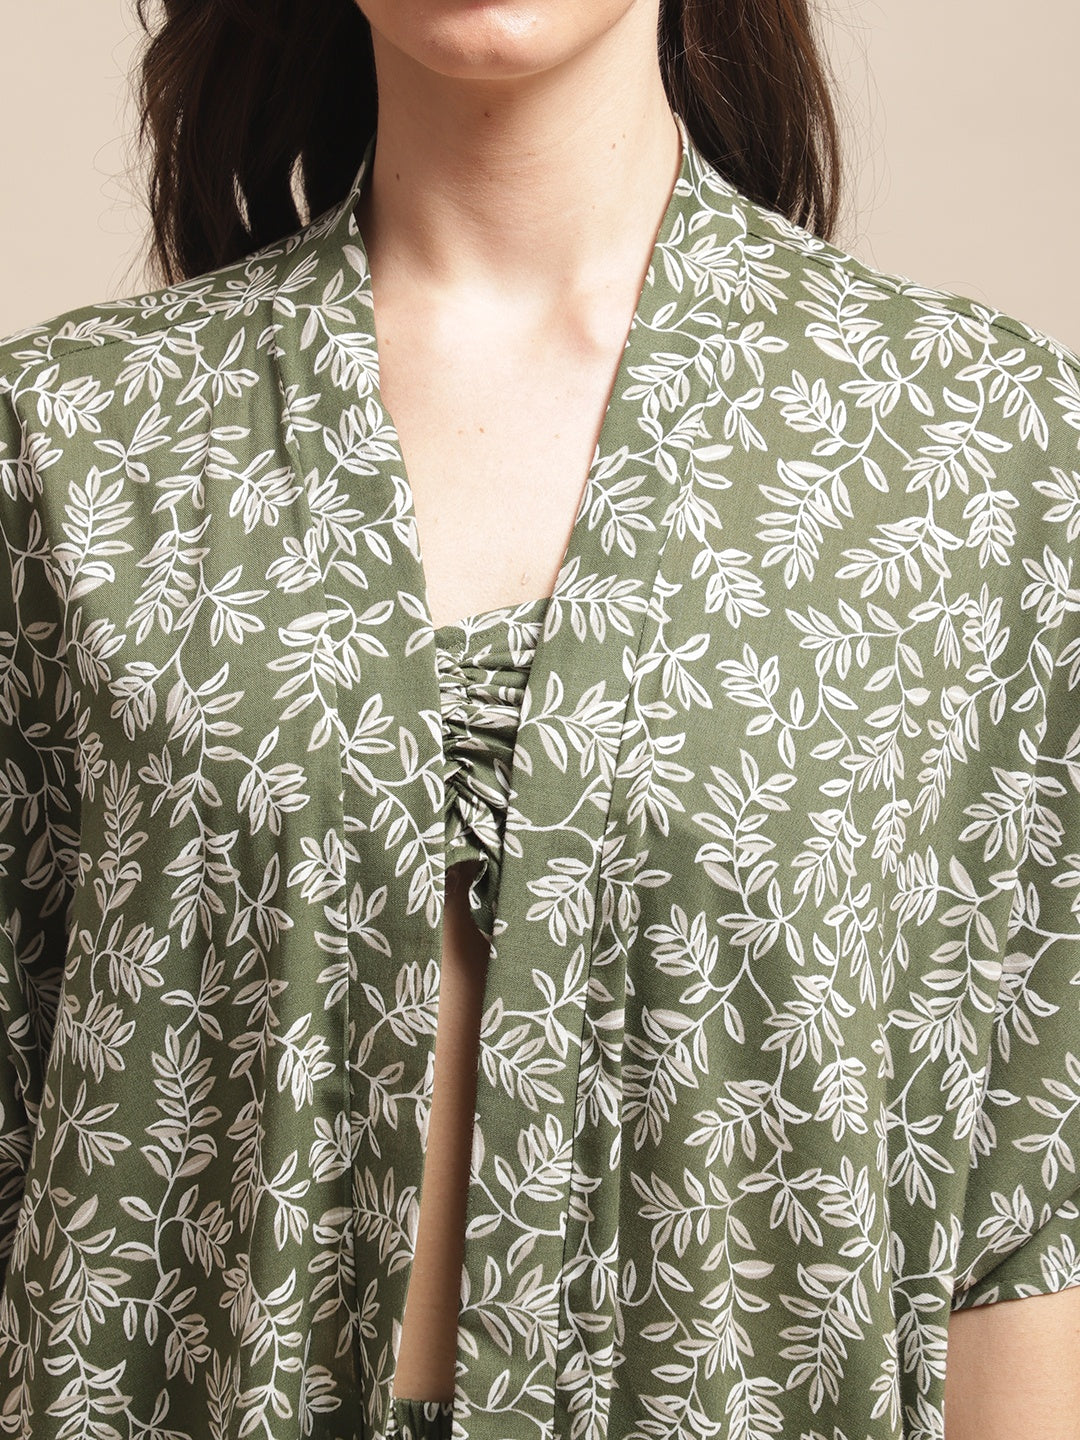 Green Color Floral Printed Viscose Rayon 3 pcs Coverup Set With Robe Beachwear For Woman Claura Designs Pvt. Ltd. Beachwear Beachwear, Beachwear_size, Coverup, Floral, Green, Printed, Rayon, Swimwear